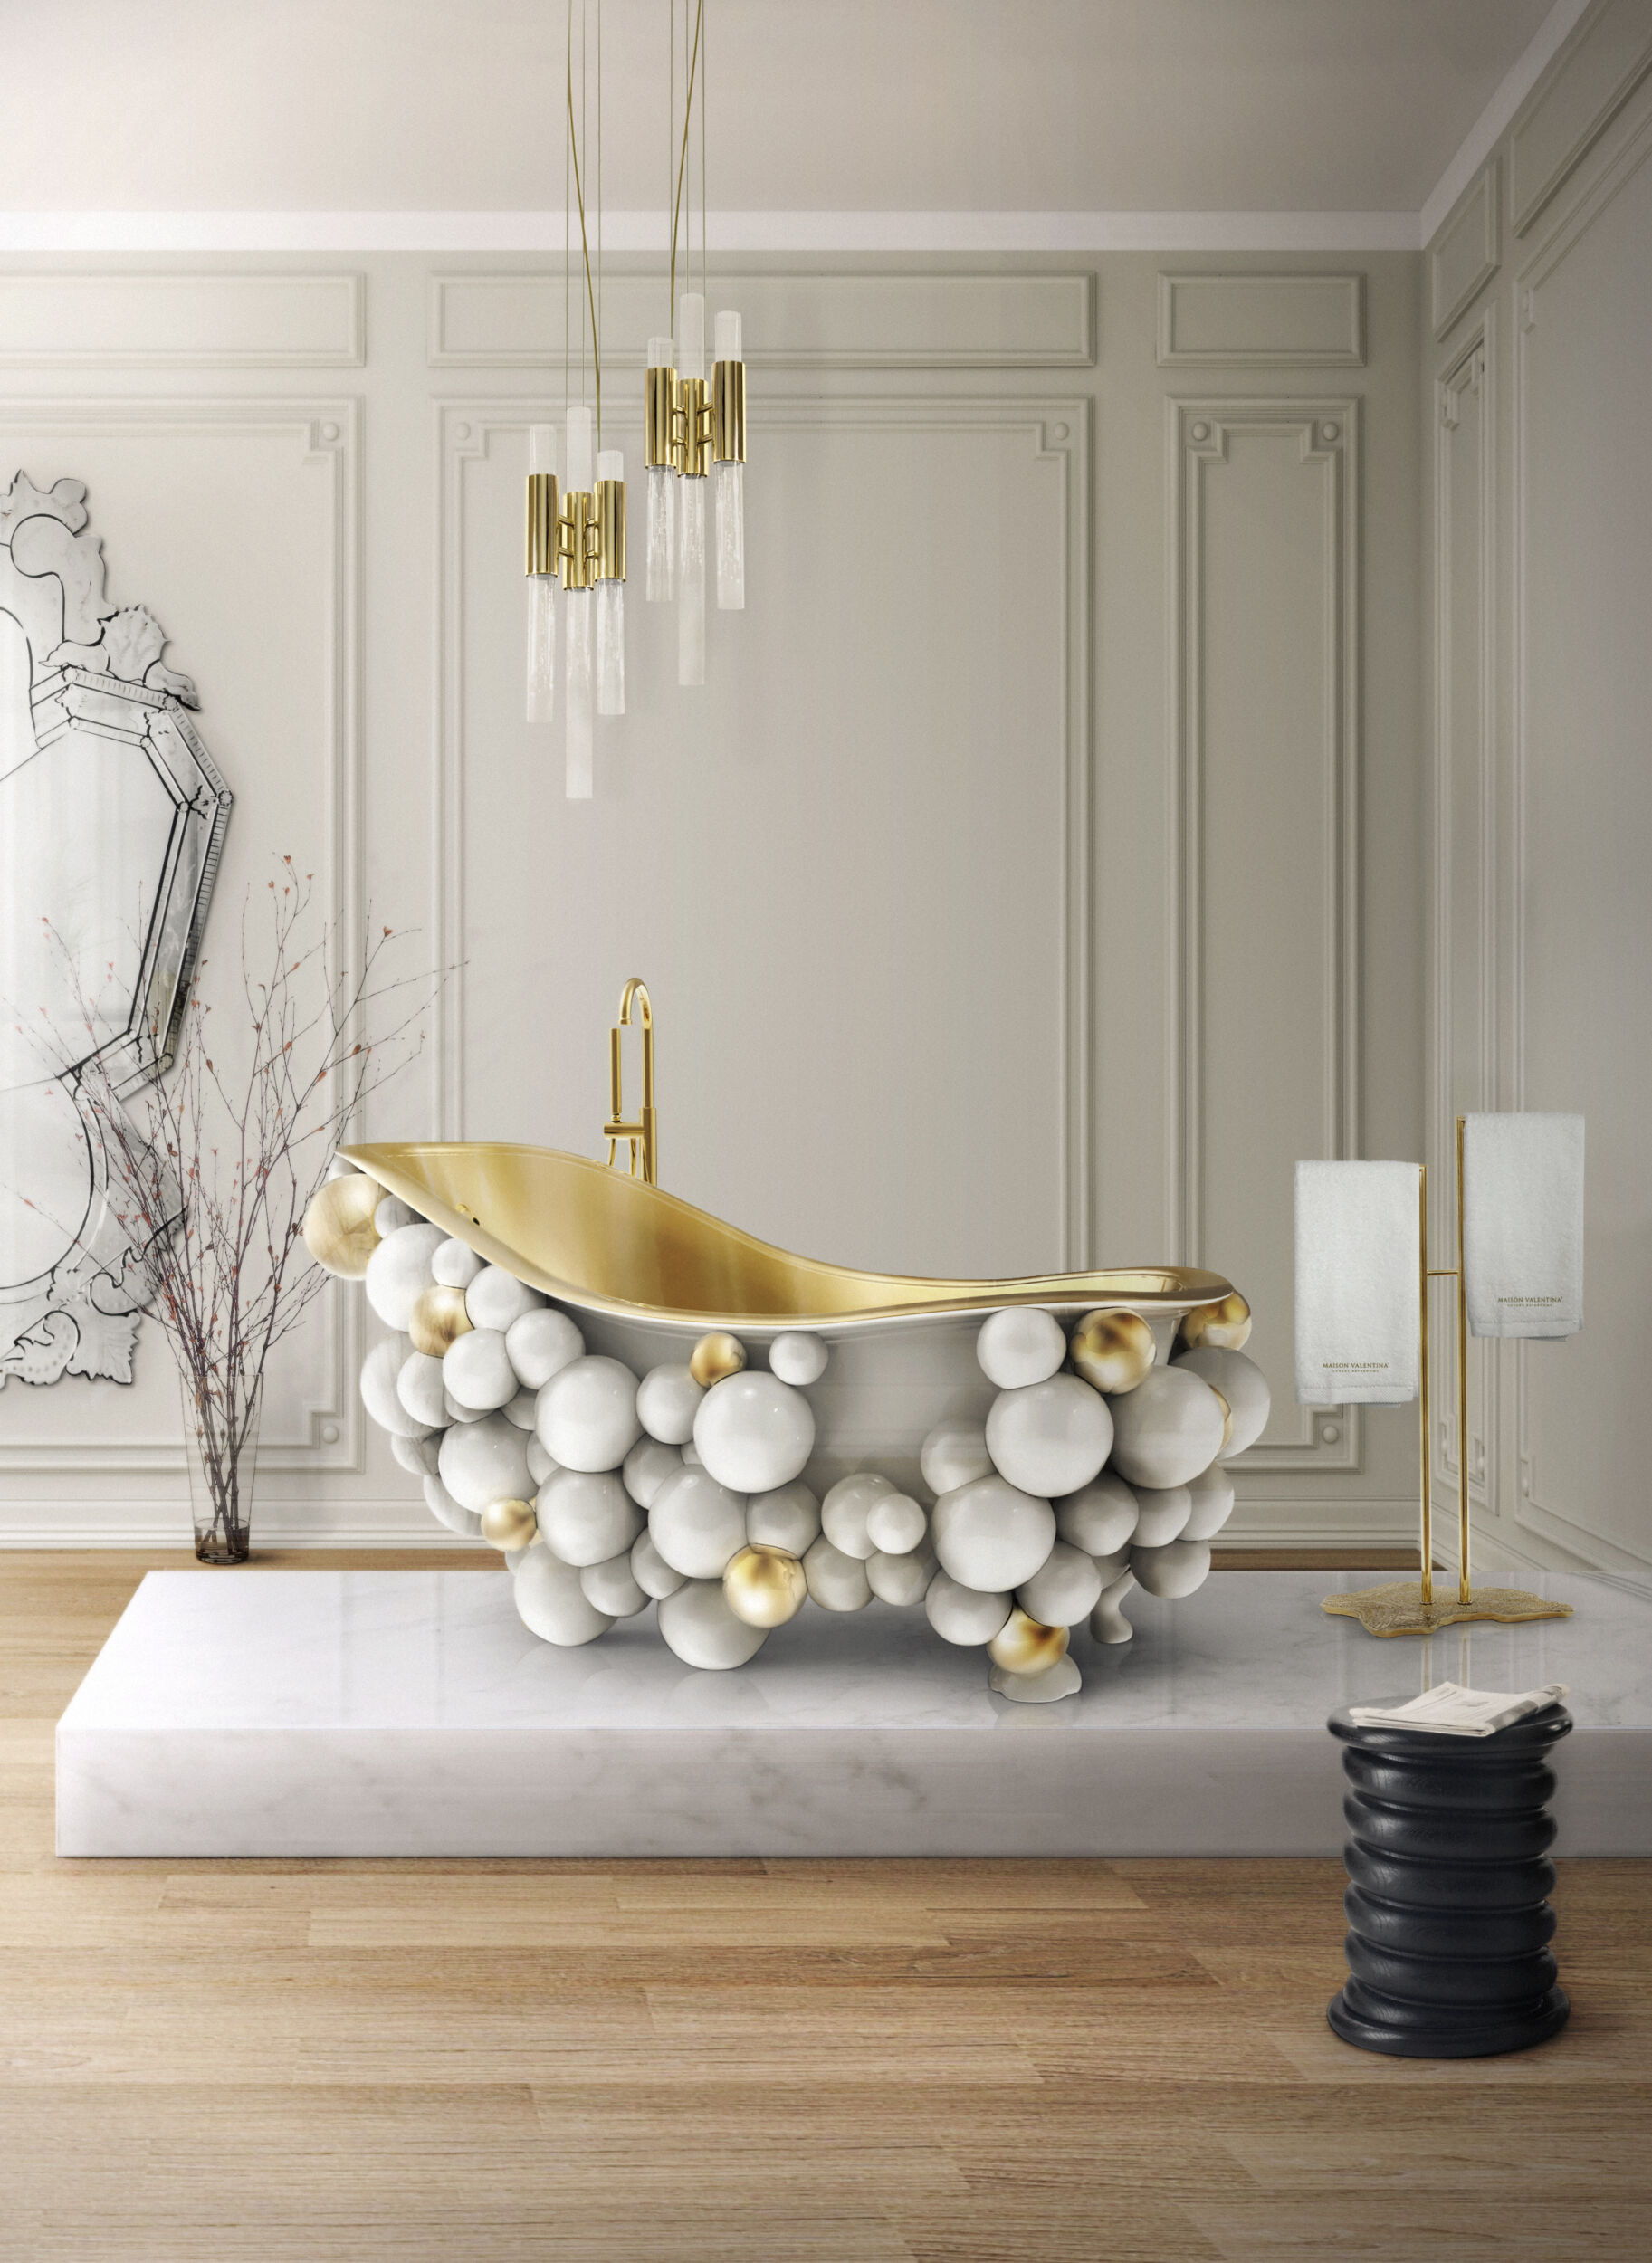 A Chandelier Over Bathtub May Look, What Size Chandelier For Over Bathtub